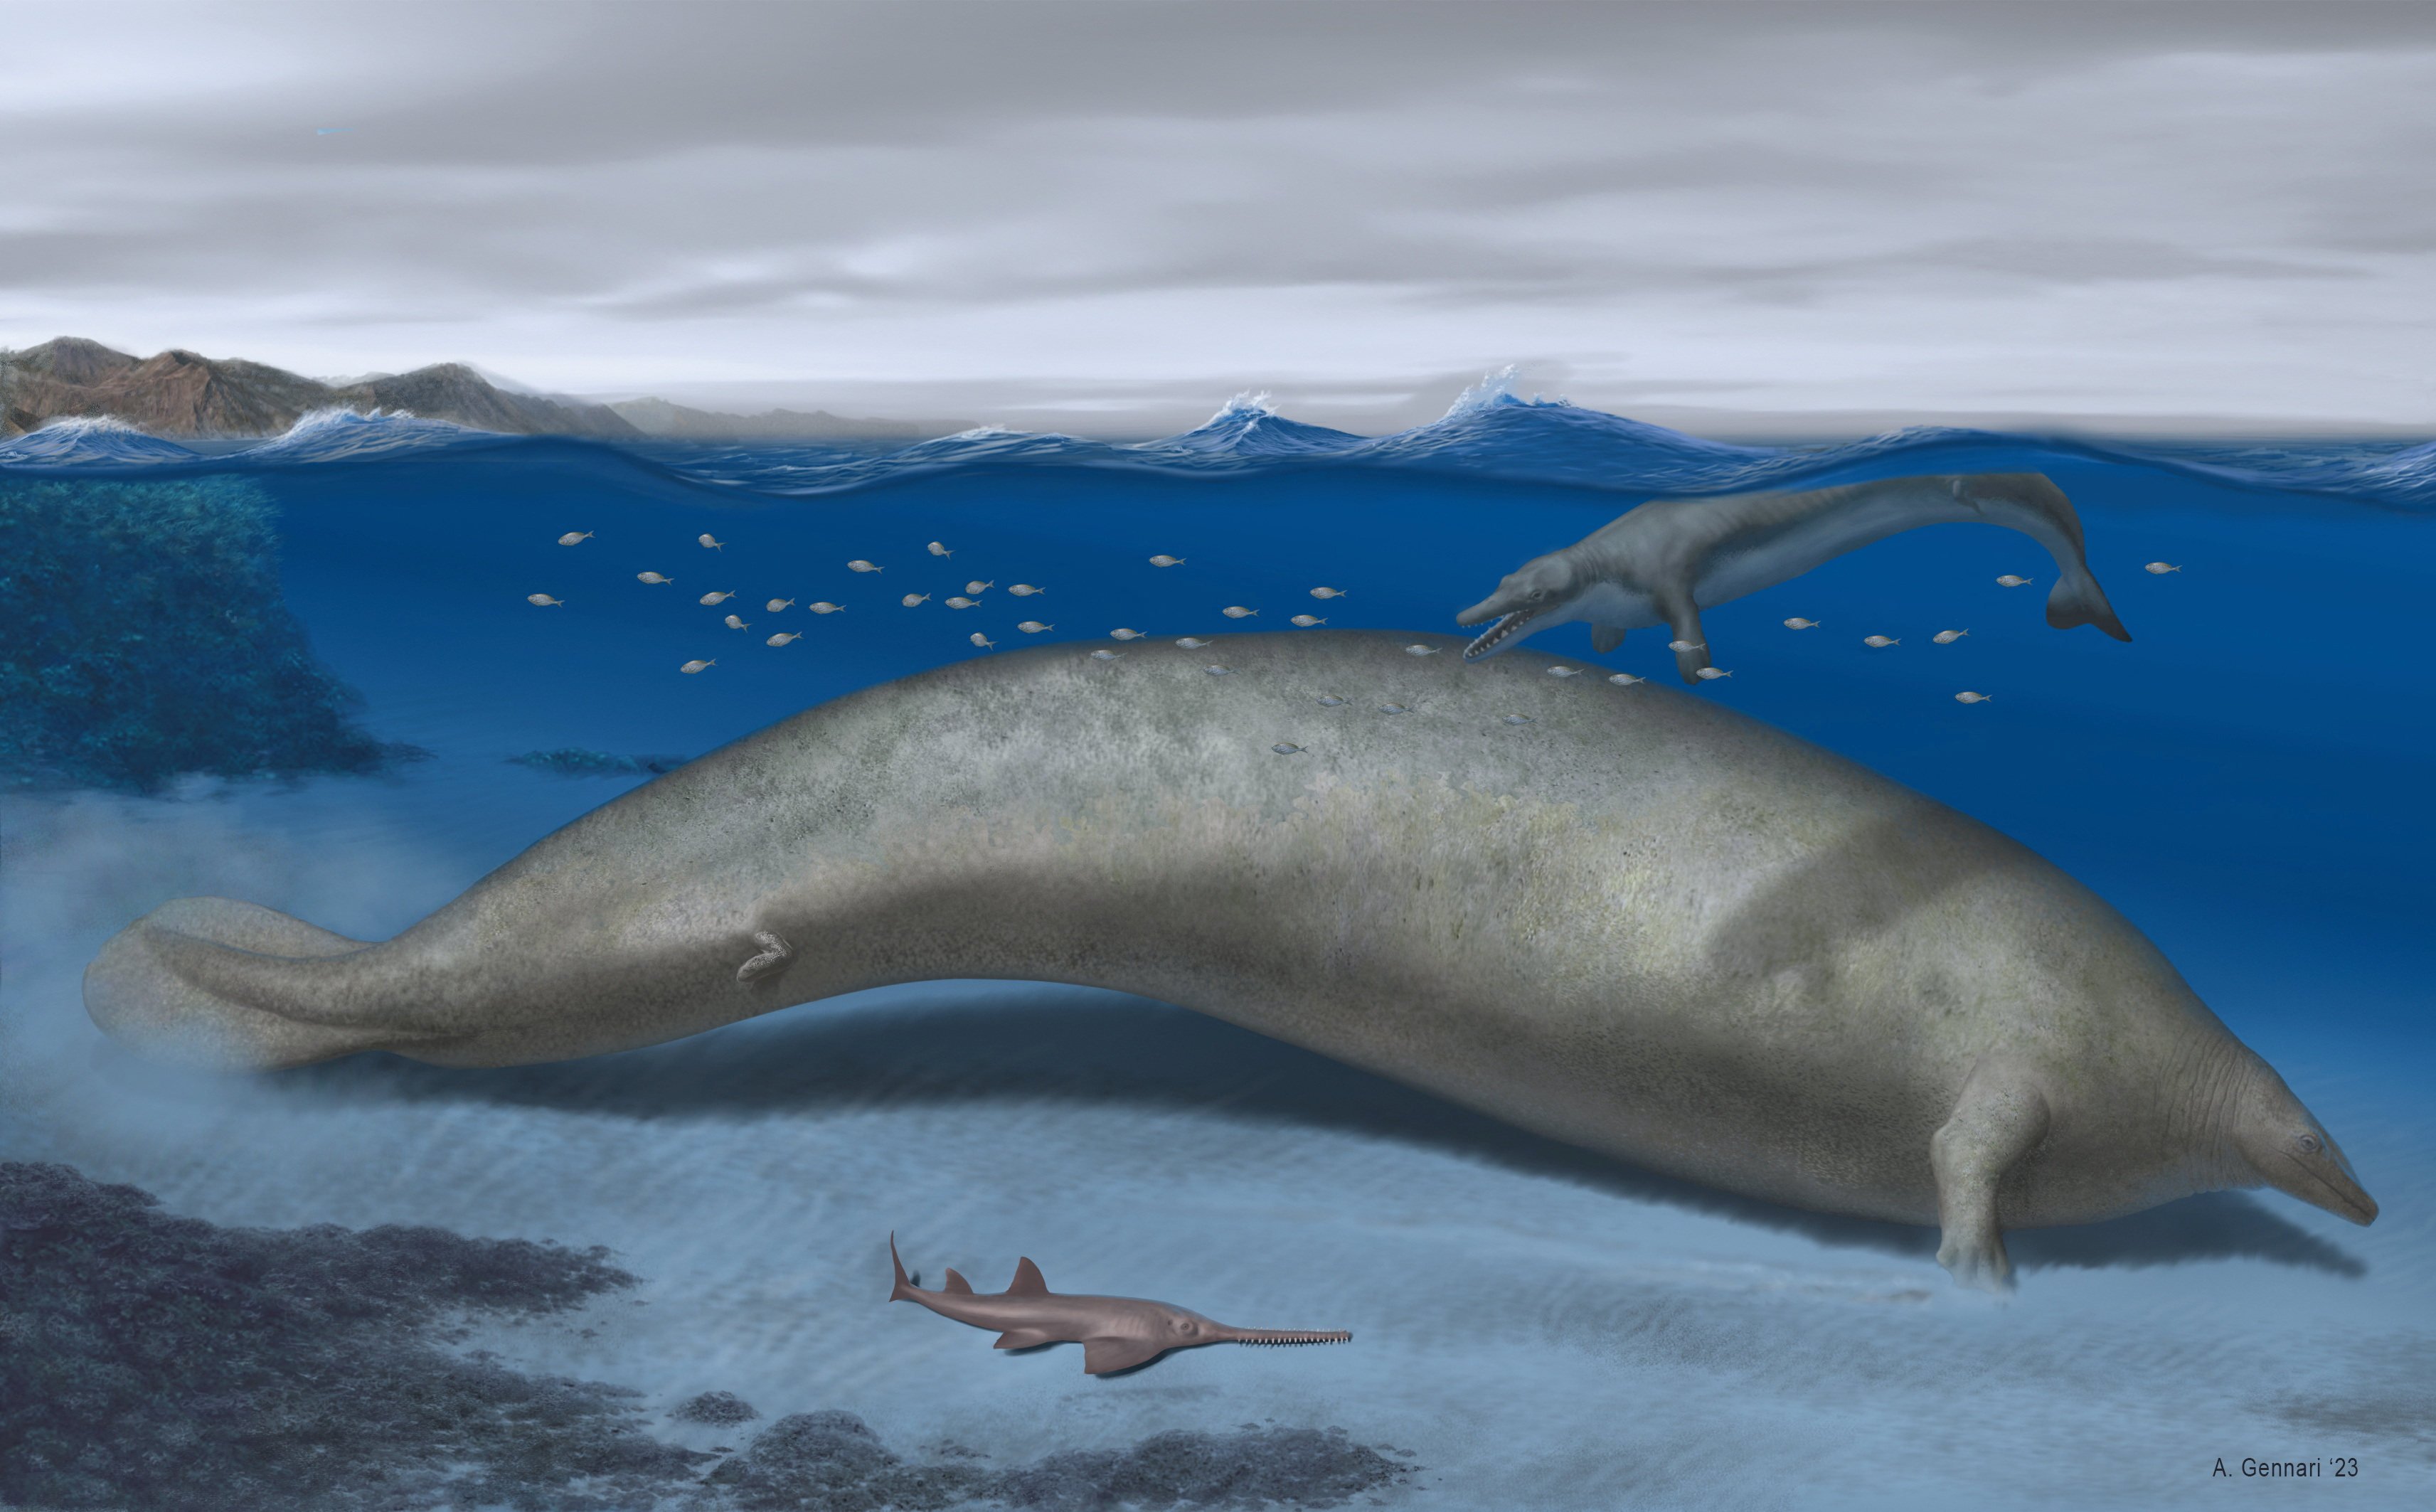 Perucetus colossus, an early whale from Peru that lived about 38-40 million years ago, is seen in an undated artist’s rendition. Image: Alberto Gennari via Reuters